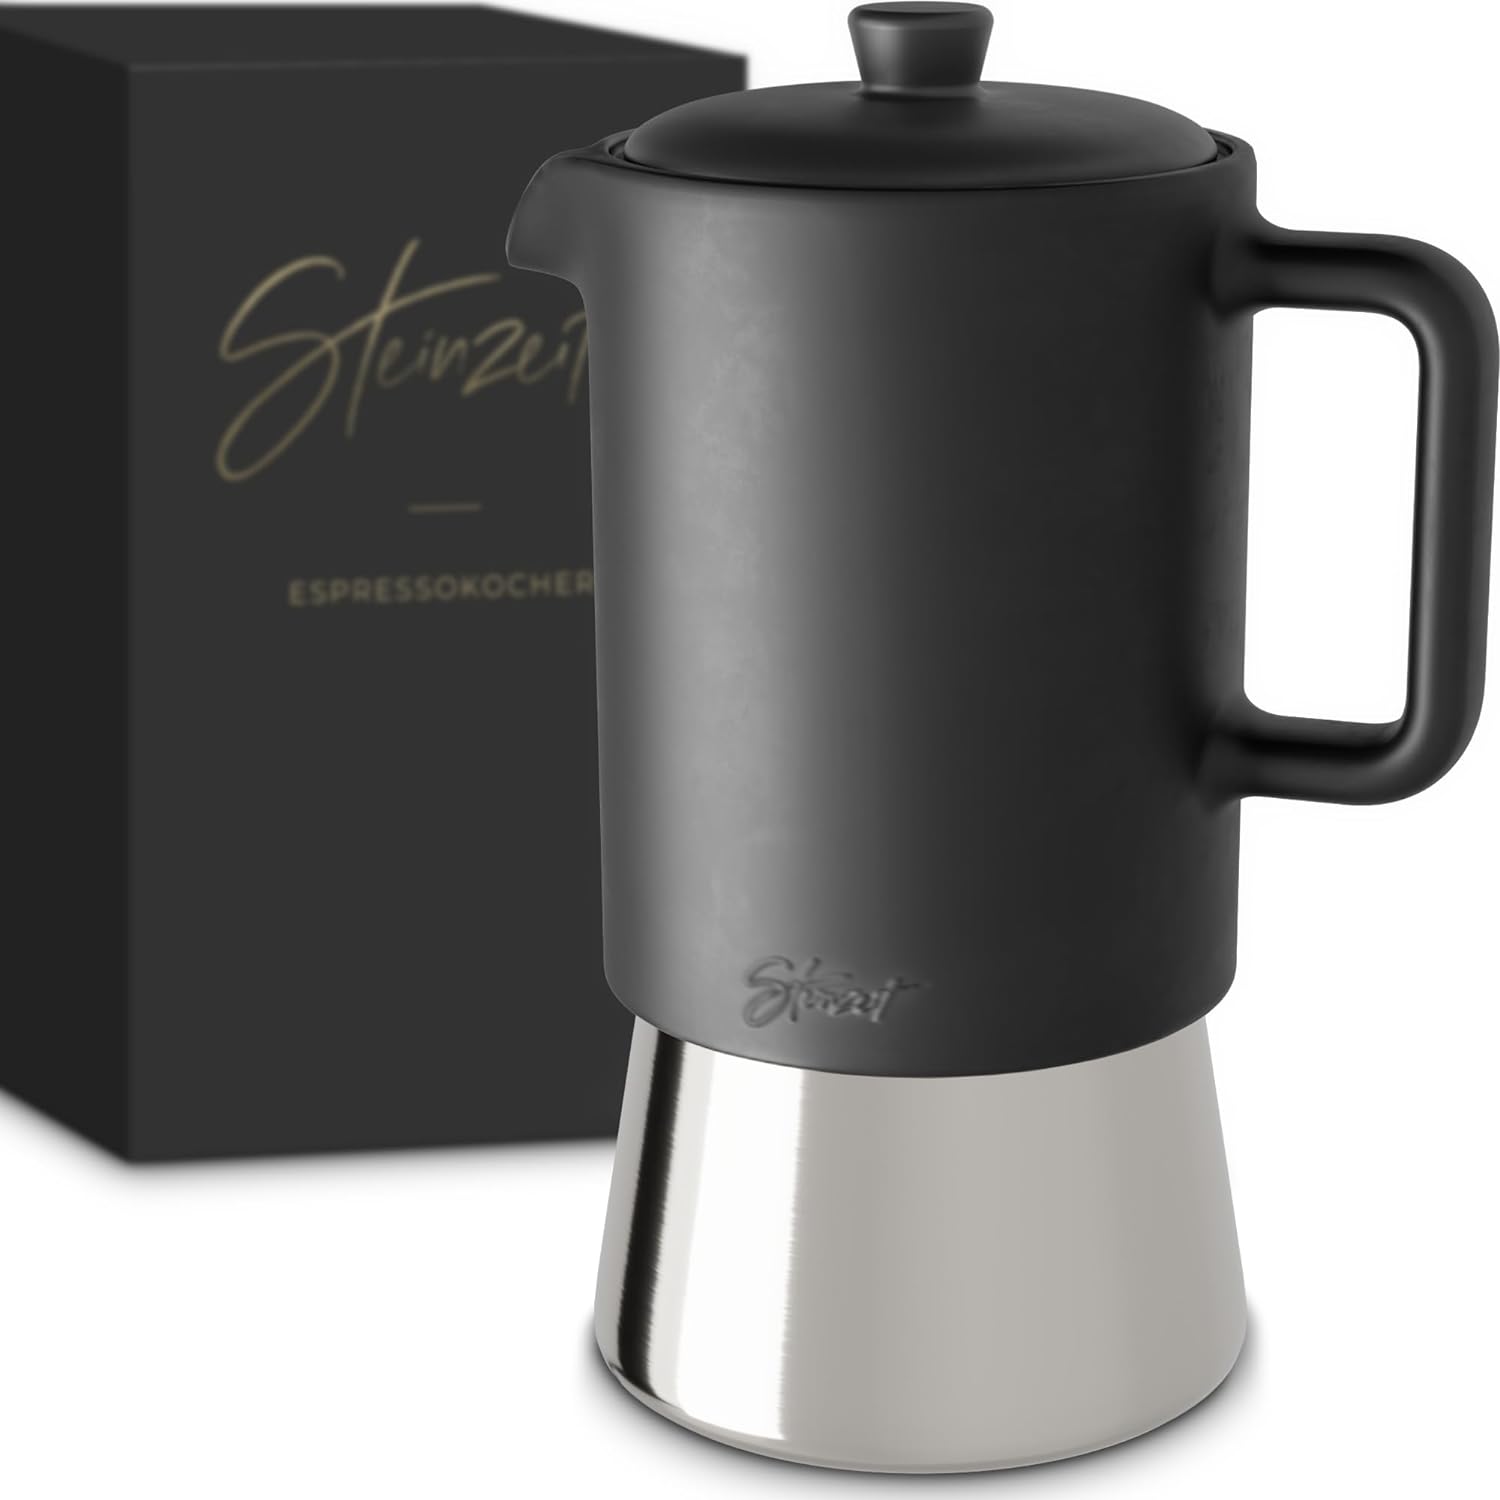 Stone Age Design Ceramic Espresso Maker (300 ml) - Espresso Maker Suitable for All Types of Cookers - Mocha Pot with Stainless Steel Base and Ceramic Jug - Espresso Maker Stainless Steel